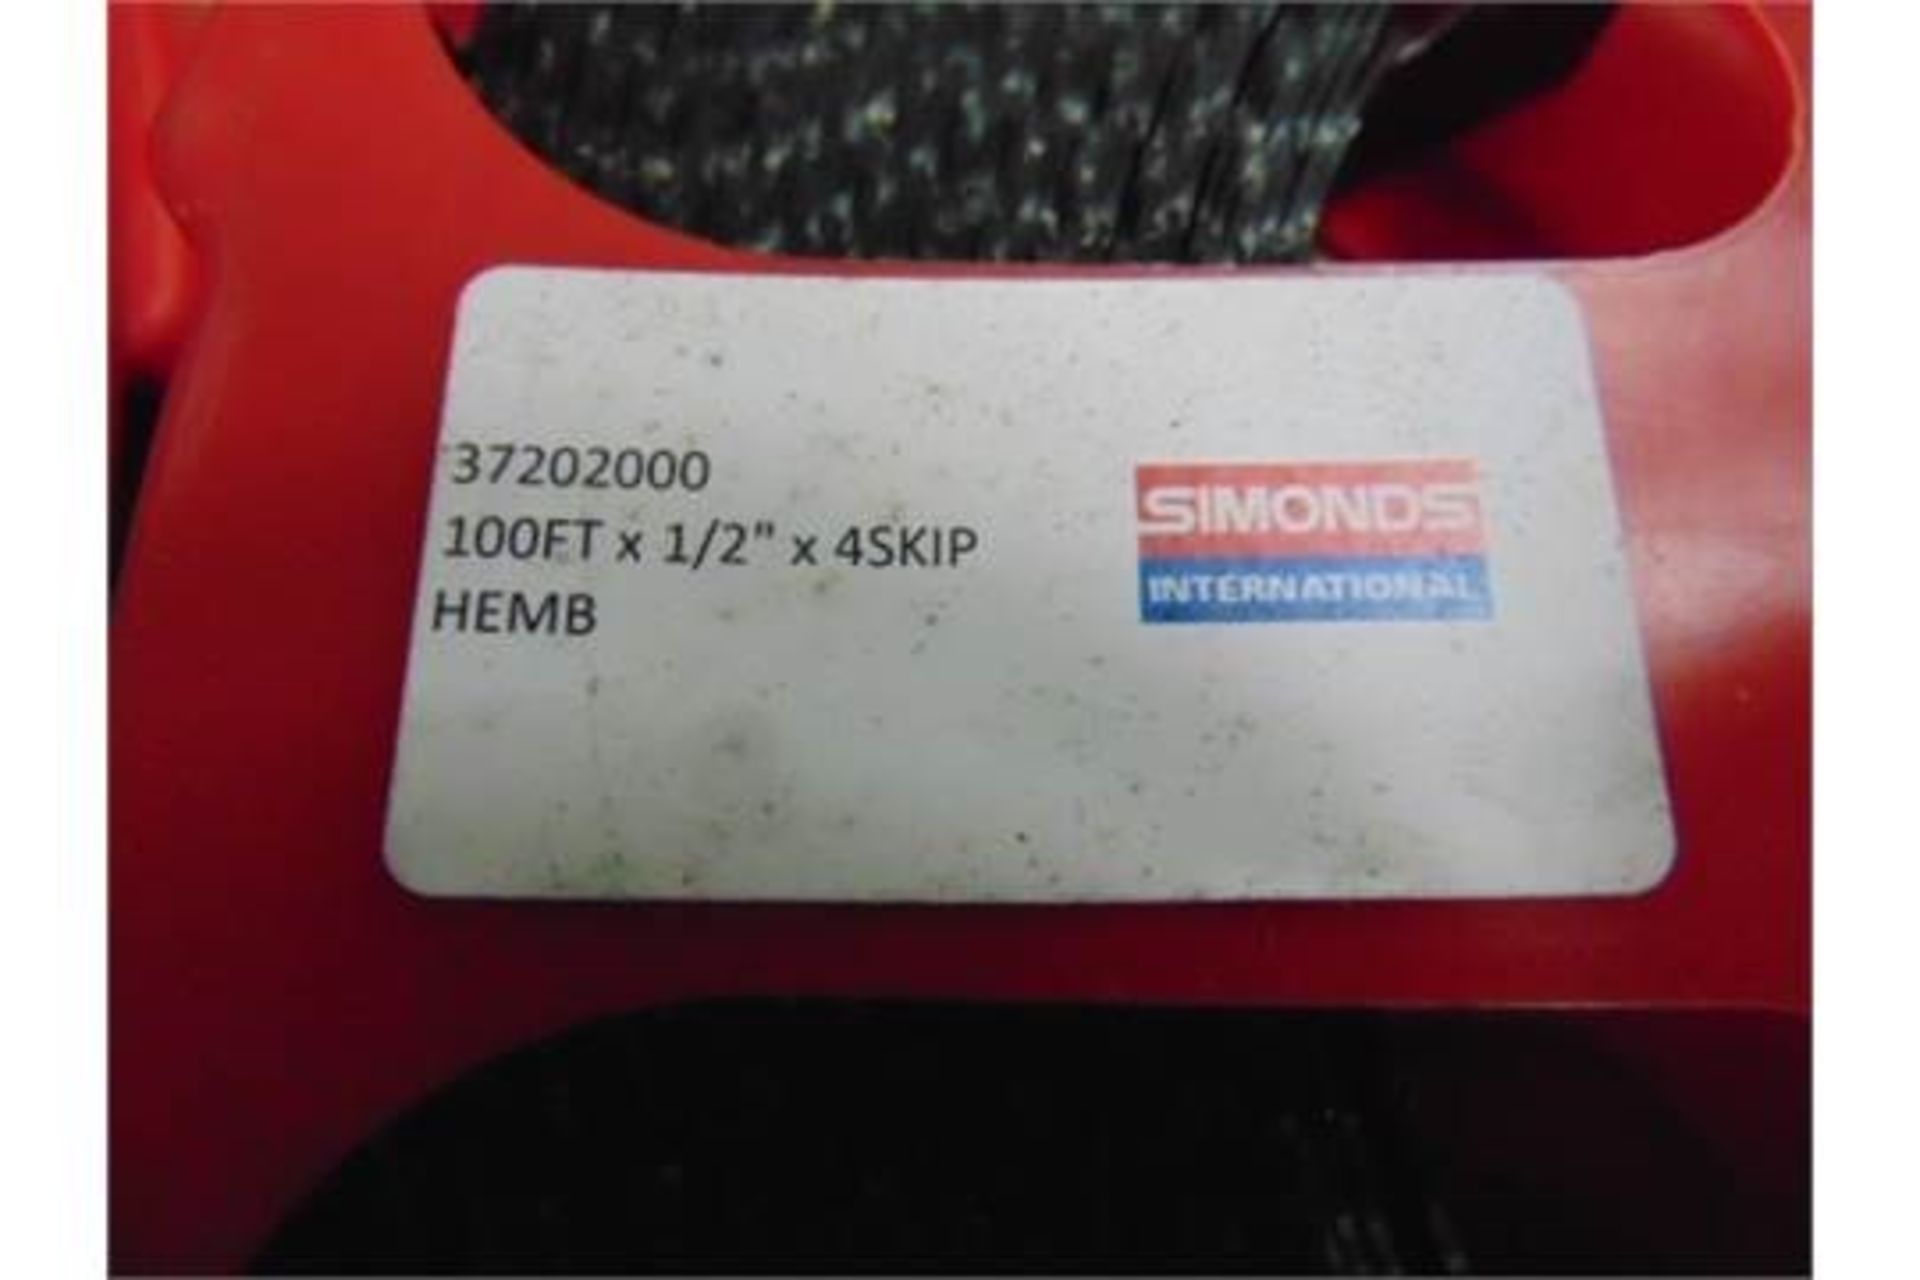 42 x Simmonds 100ft 1/2" x 4 Skip Band Saw Blade Coils - Image 4 of 4